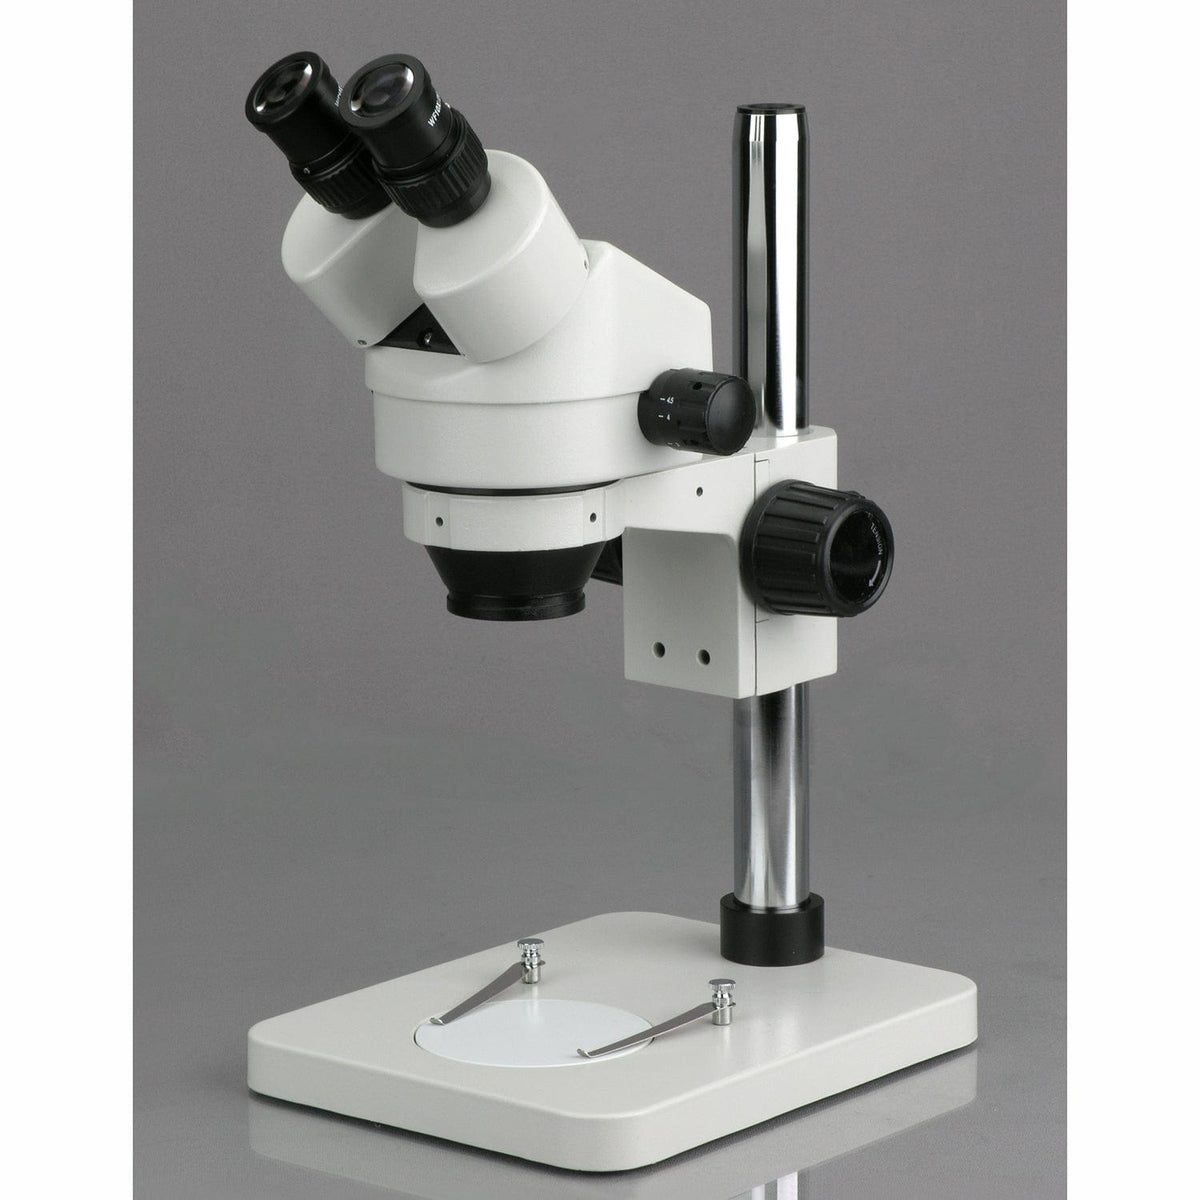 Amscope SM-1BSL-64S-V331 7X - 45X Stereo Binocular Microscope with 14 Inch Pillar Stand and 64 LED Ring Light New